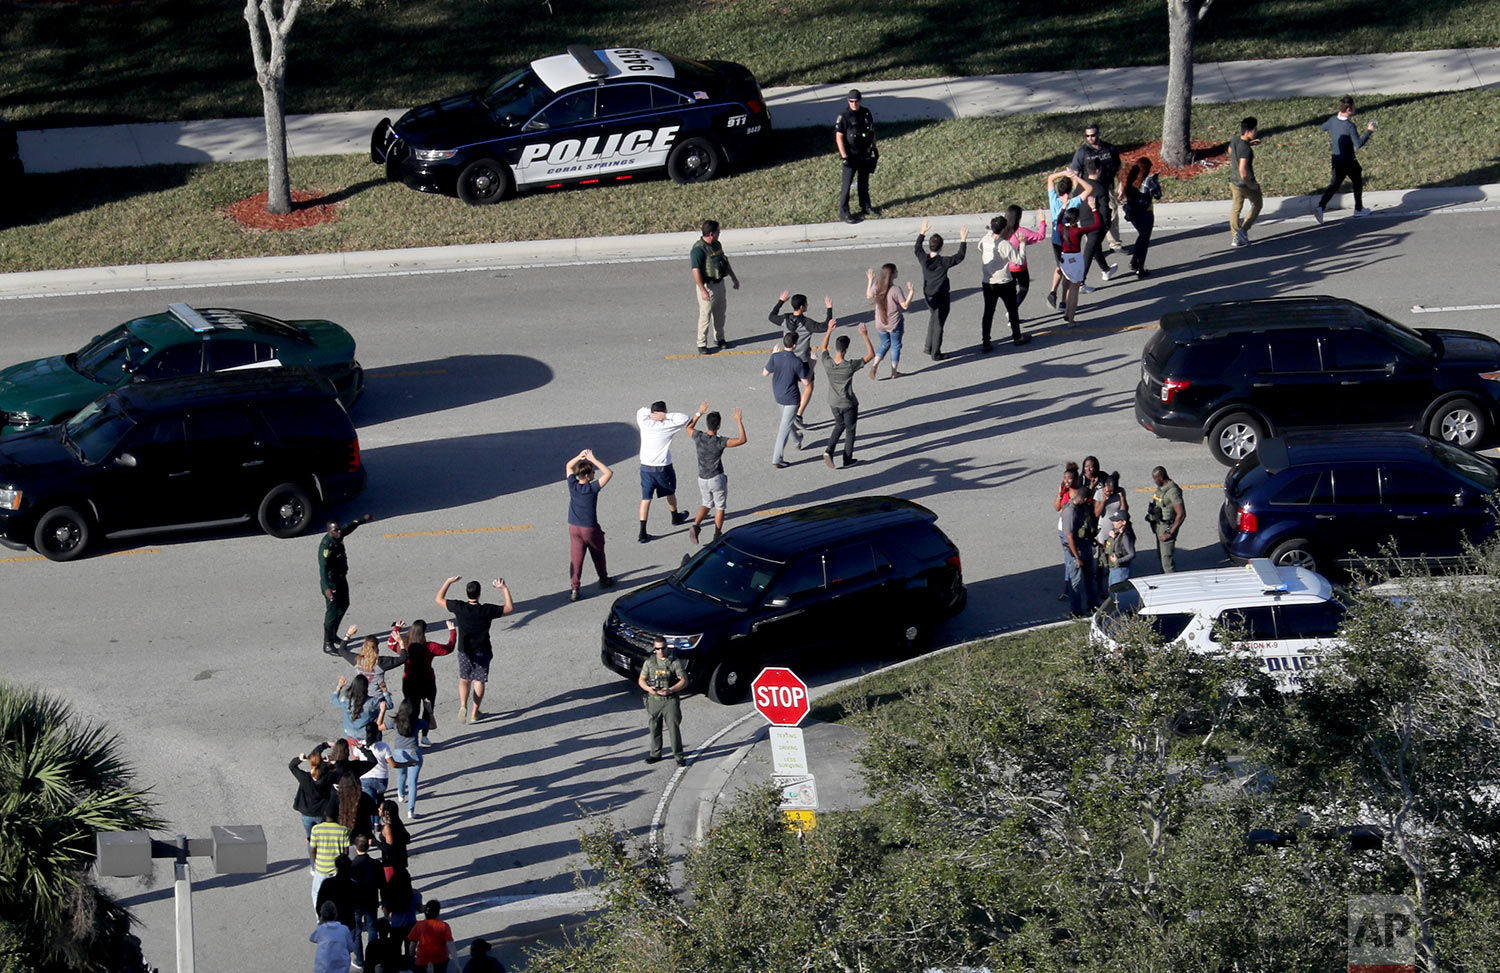  Students hold their hands in the air as they are evacuated by police from Marjory Stoneman Douglas High School in Parkland, Fla., on Wednesday, Feb. 14, 2018, after a shooter opened fire on the campus. (Mike Stocker/South Florida Sun-Sentinel via AP) 